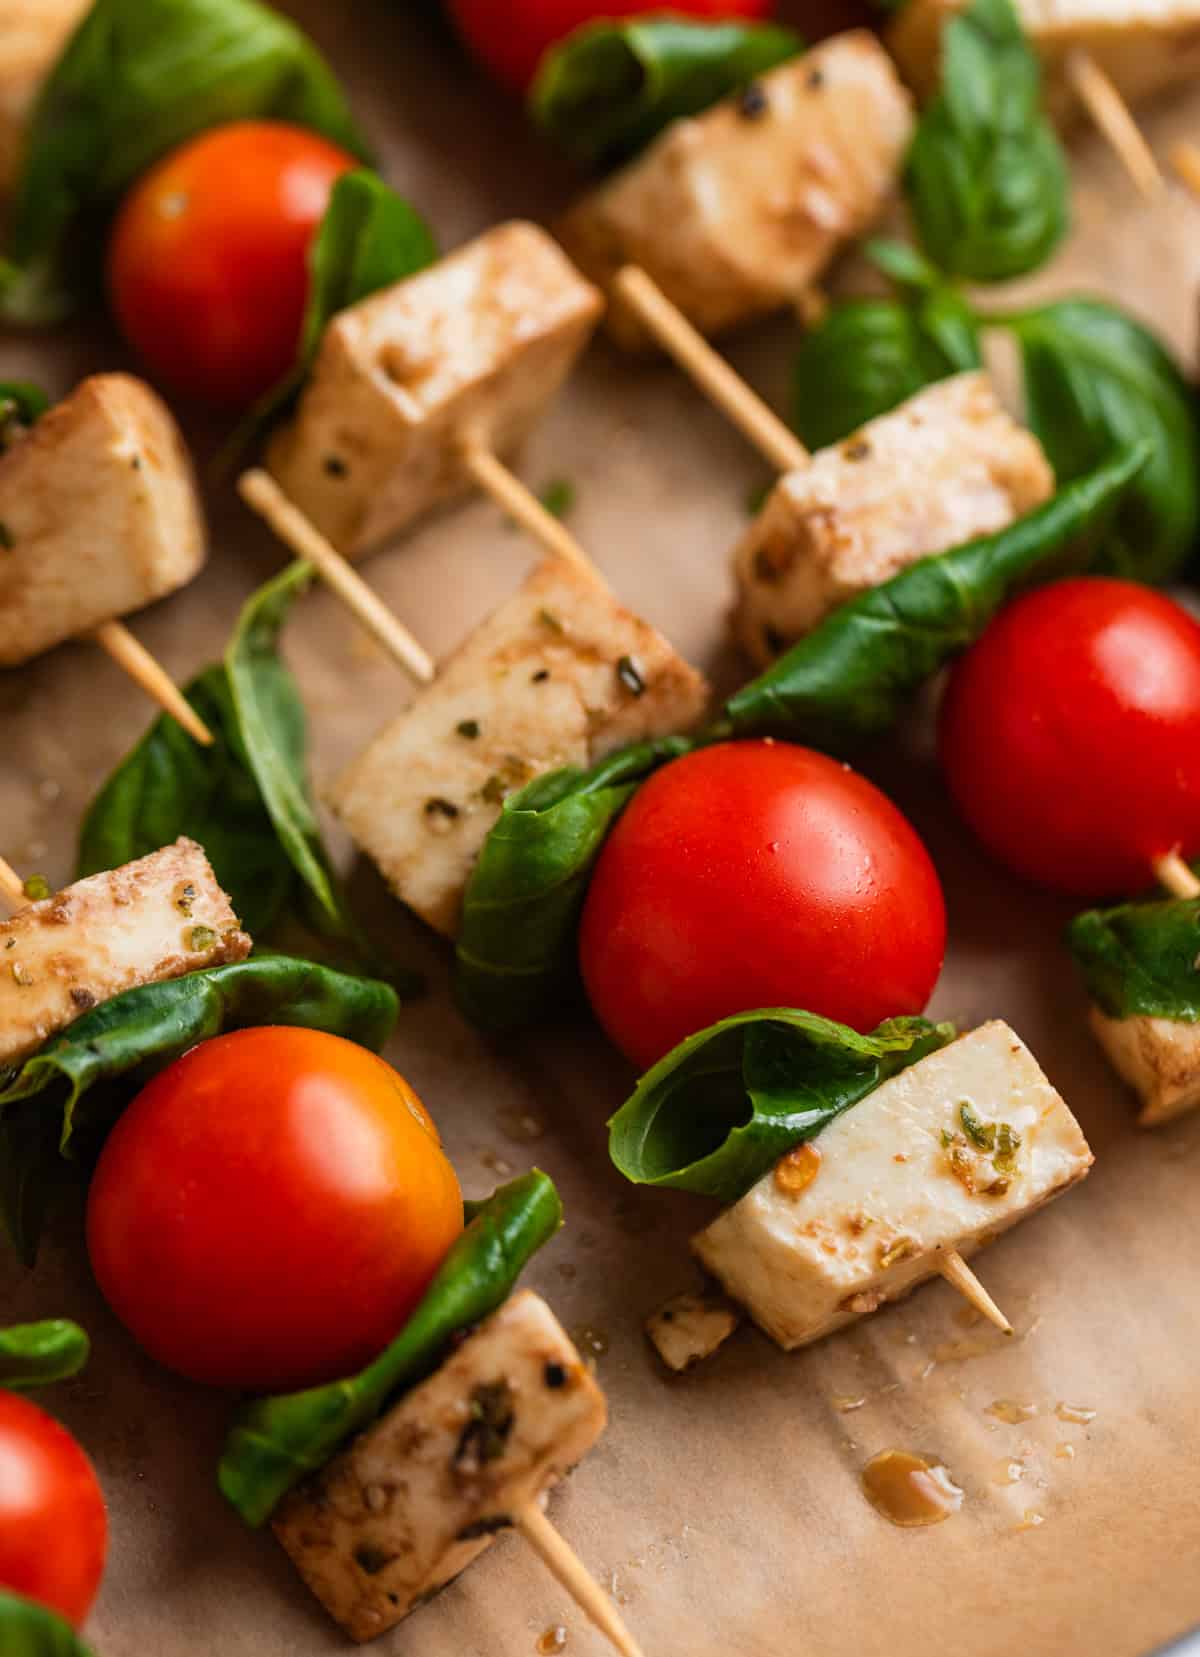 Tomato mozzarella basil skewers on parchment lined tray.